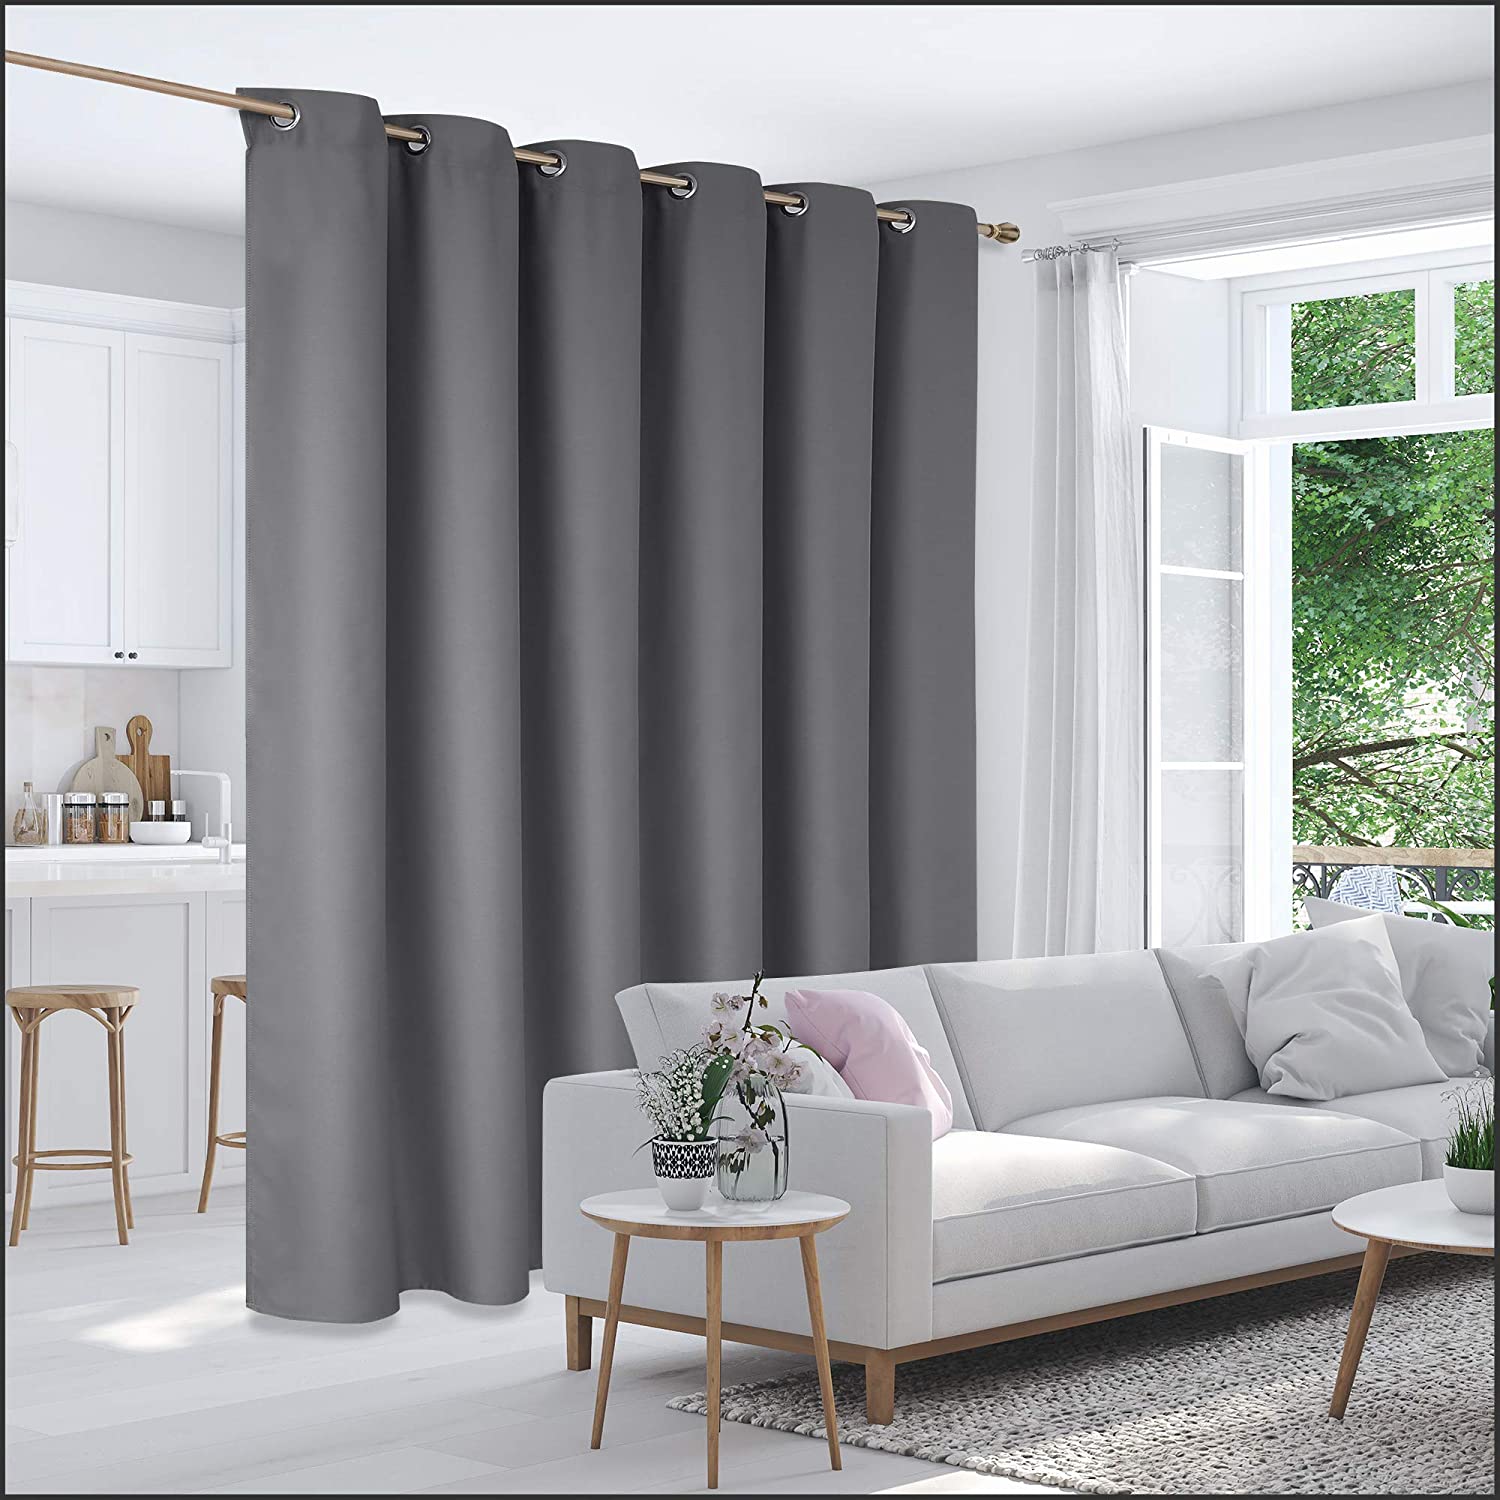 Deconovo Privacy Room Divider Curtain Thermal Insulated Blackout Curtains Screen